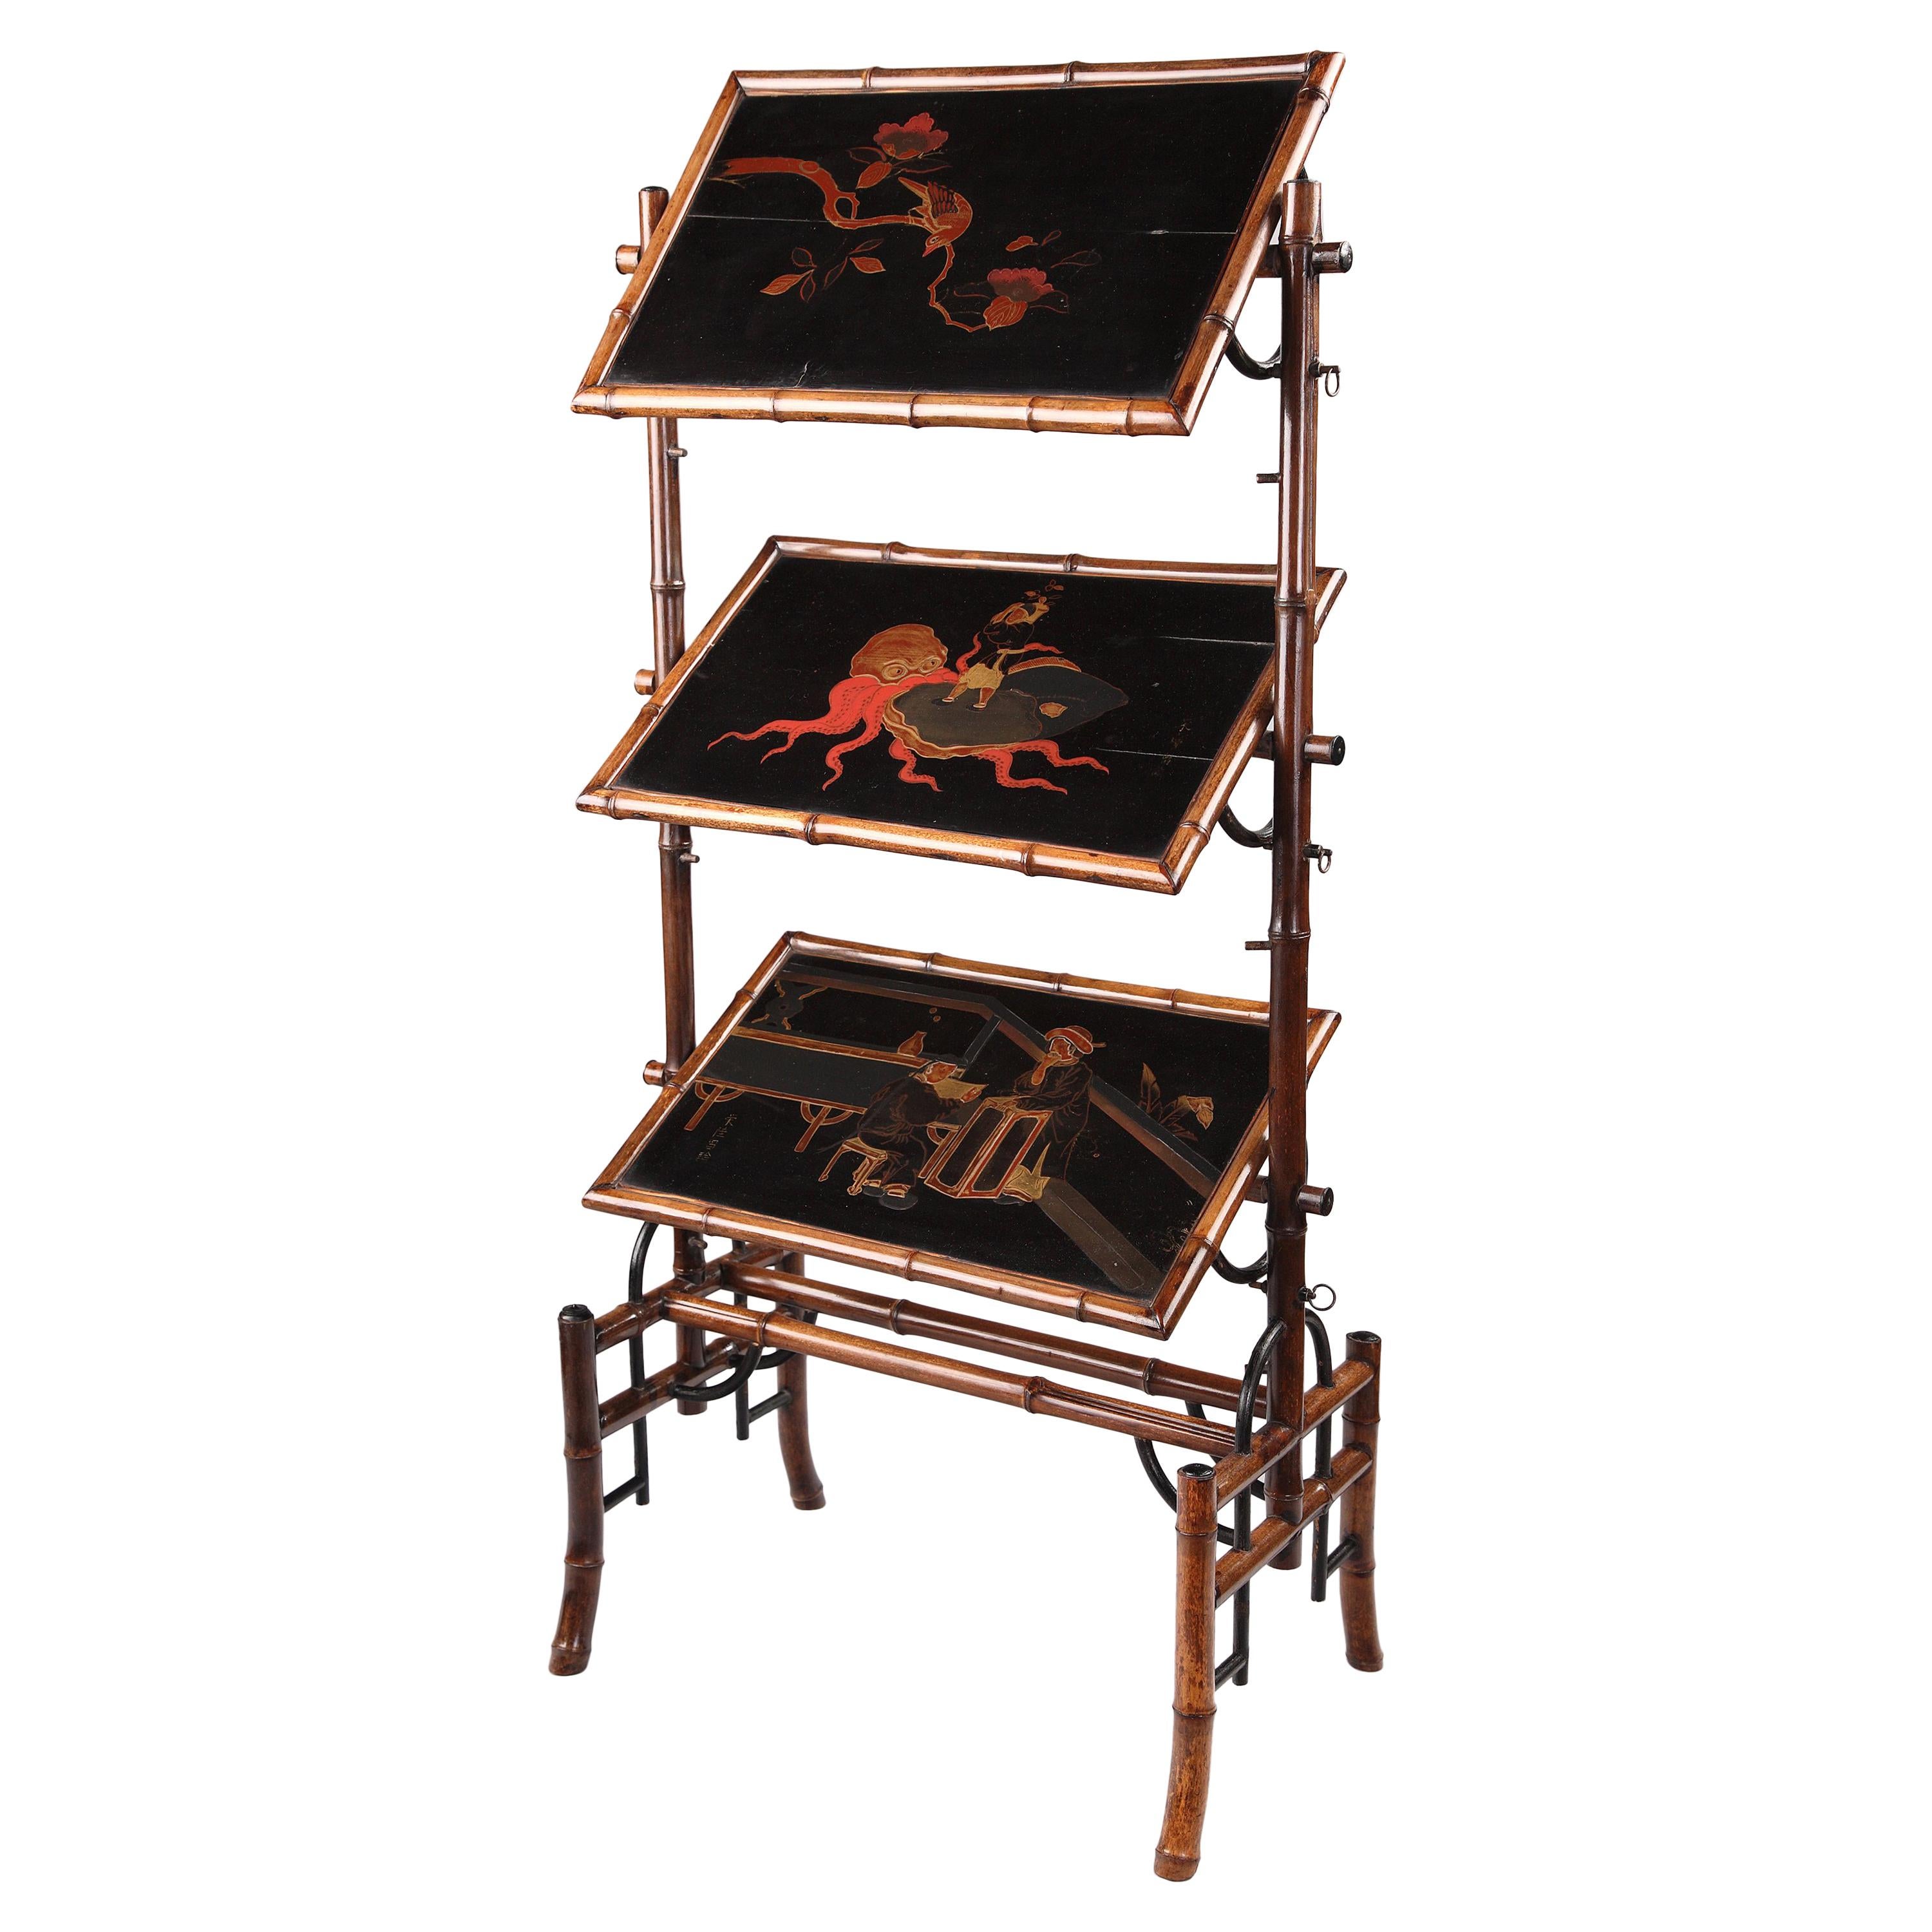 Japan Lacquer Servant Table Attributed to A. Perret & E. Vibert, France, c. 1880